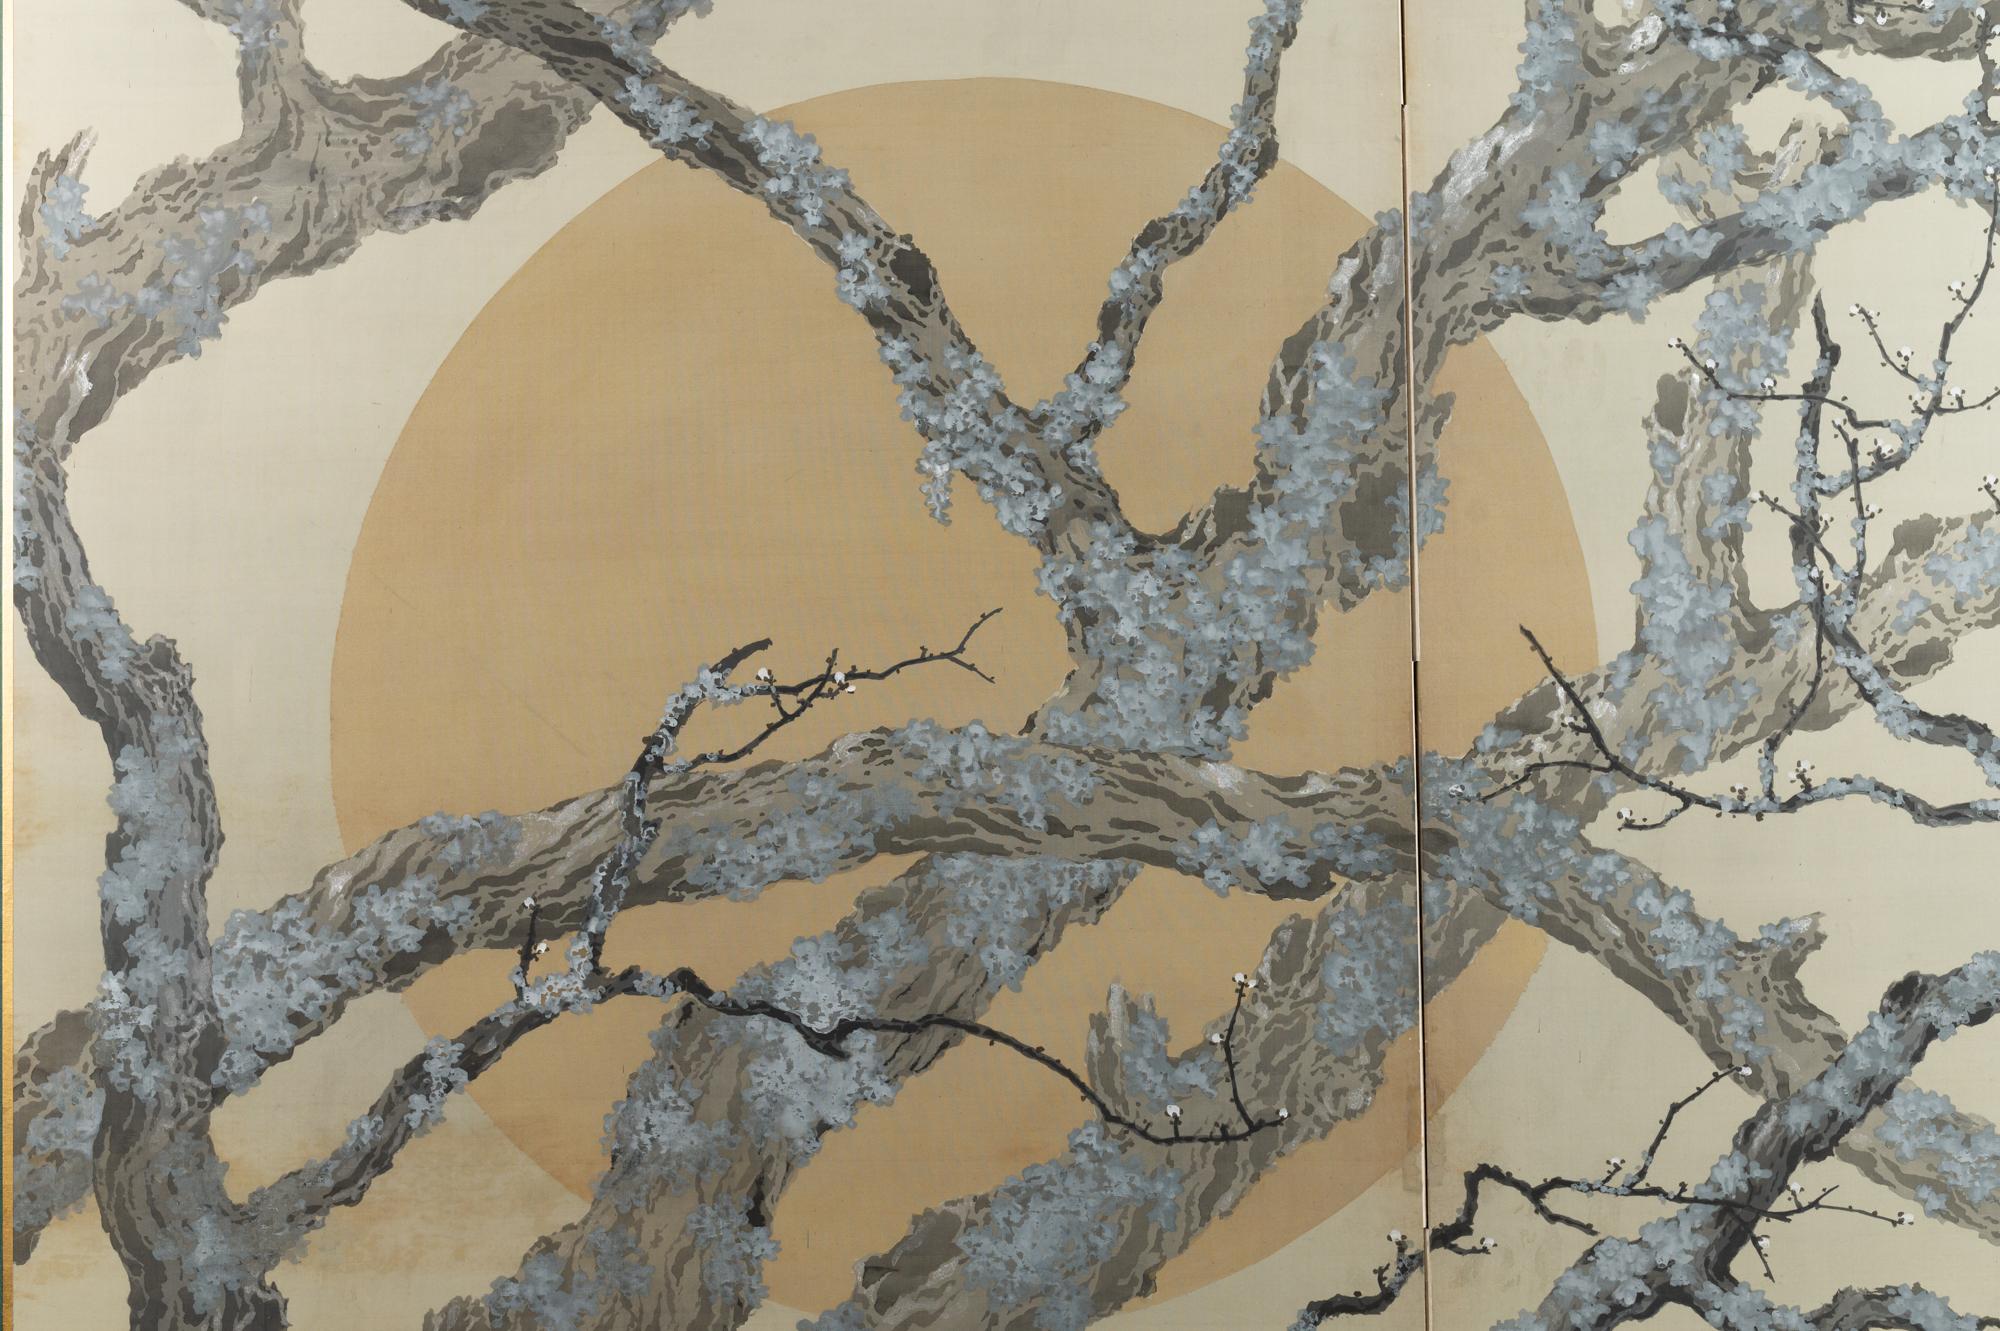 Japanese two-panel screen: Full moon through plum orchard. Taisho period (1912 - 1926) painting of a full moon shining through the craggy branches of plum trees. Wonderful painting style. This screen has a mate, both are available and sold